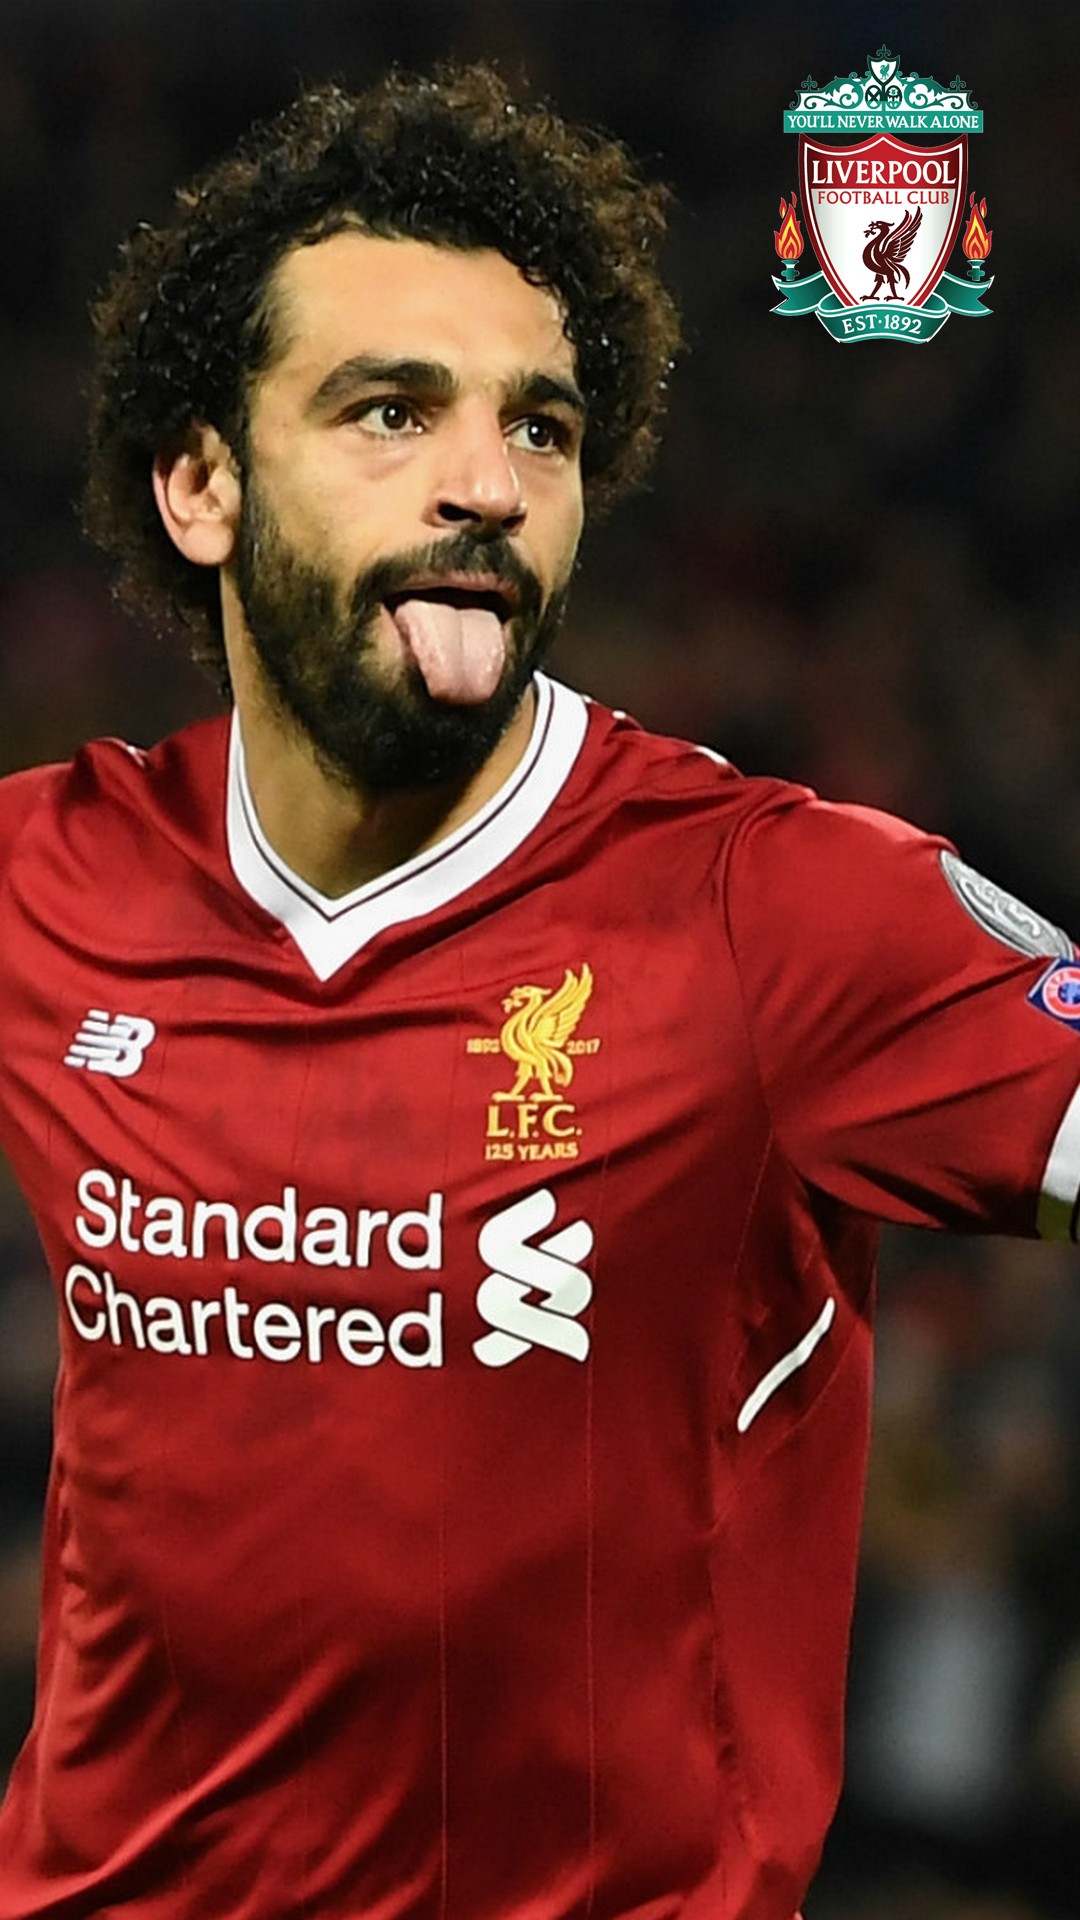 Liverpool Mohamed Salah Wallpaper iPhone with resolution 1080X1920 pixel. You can make this wallpaper for your iPhone 5, 6, 7, 8, X backgrounds, Mobile Screensaver, or iPad Lock Screen